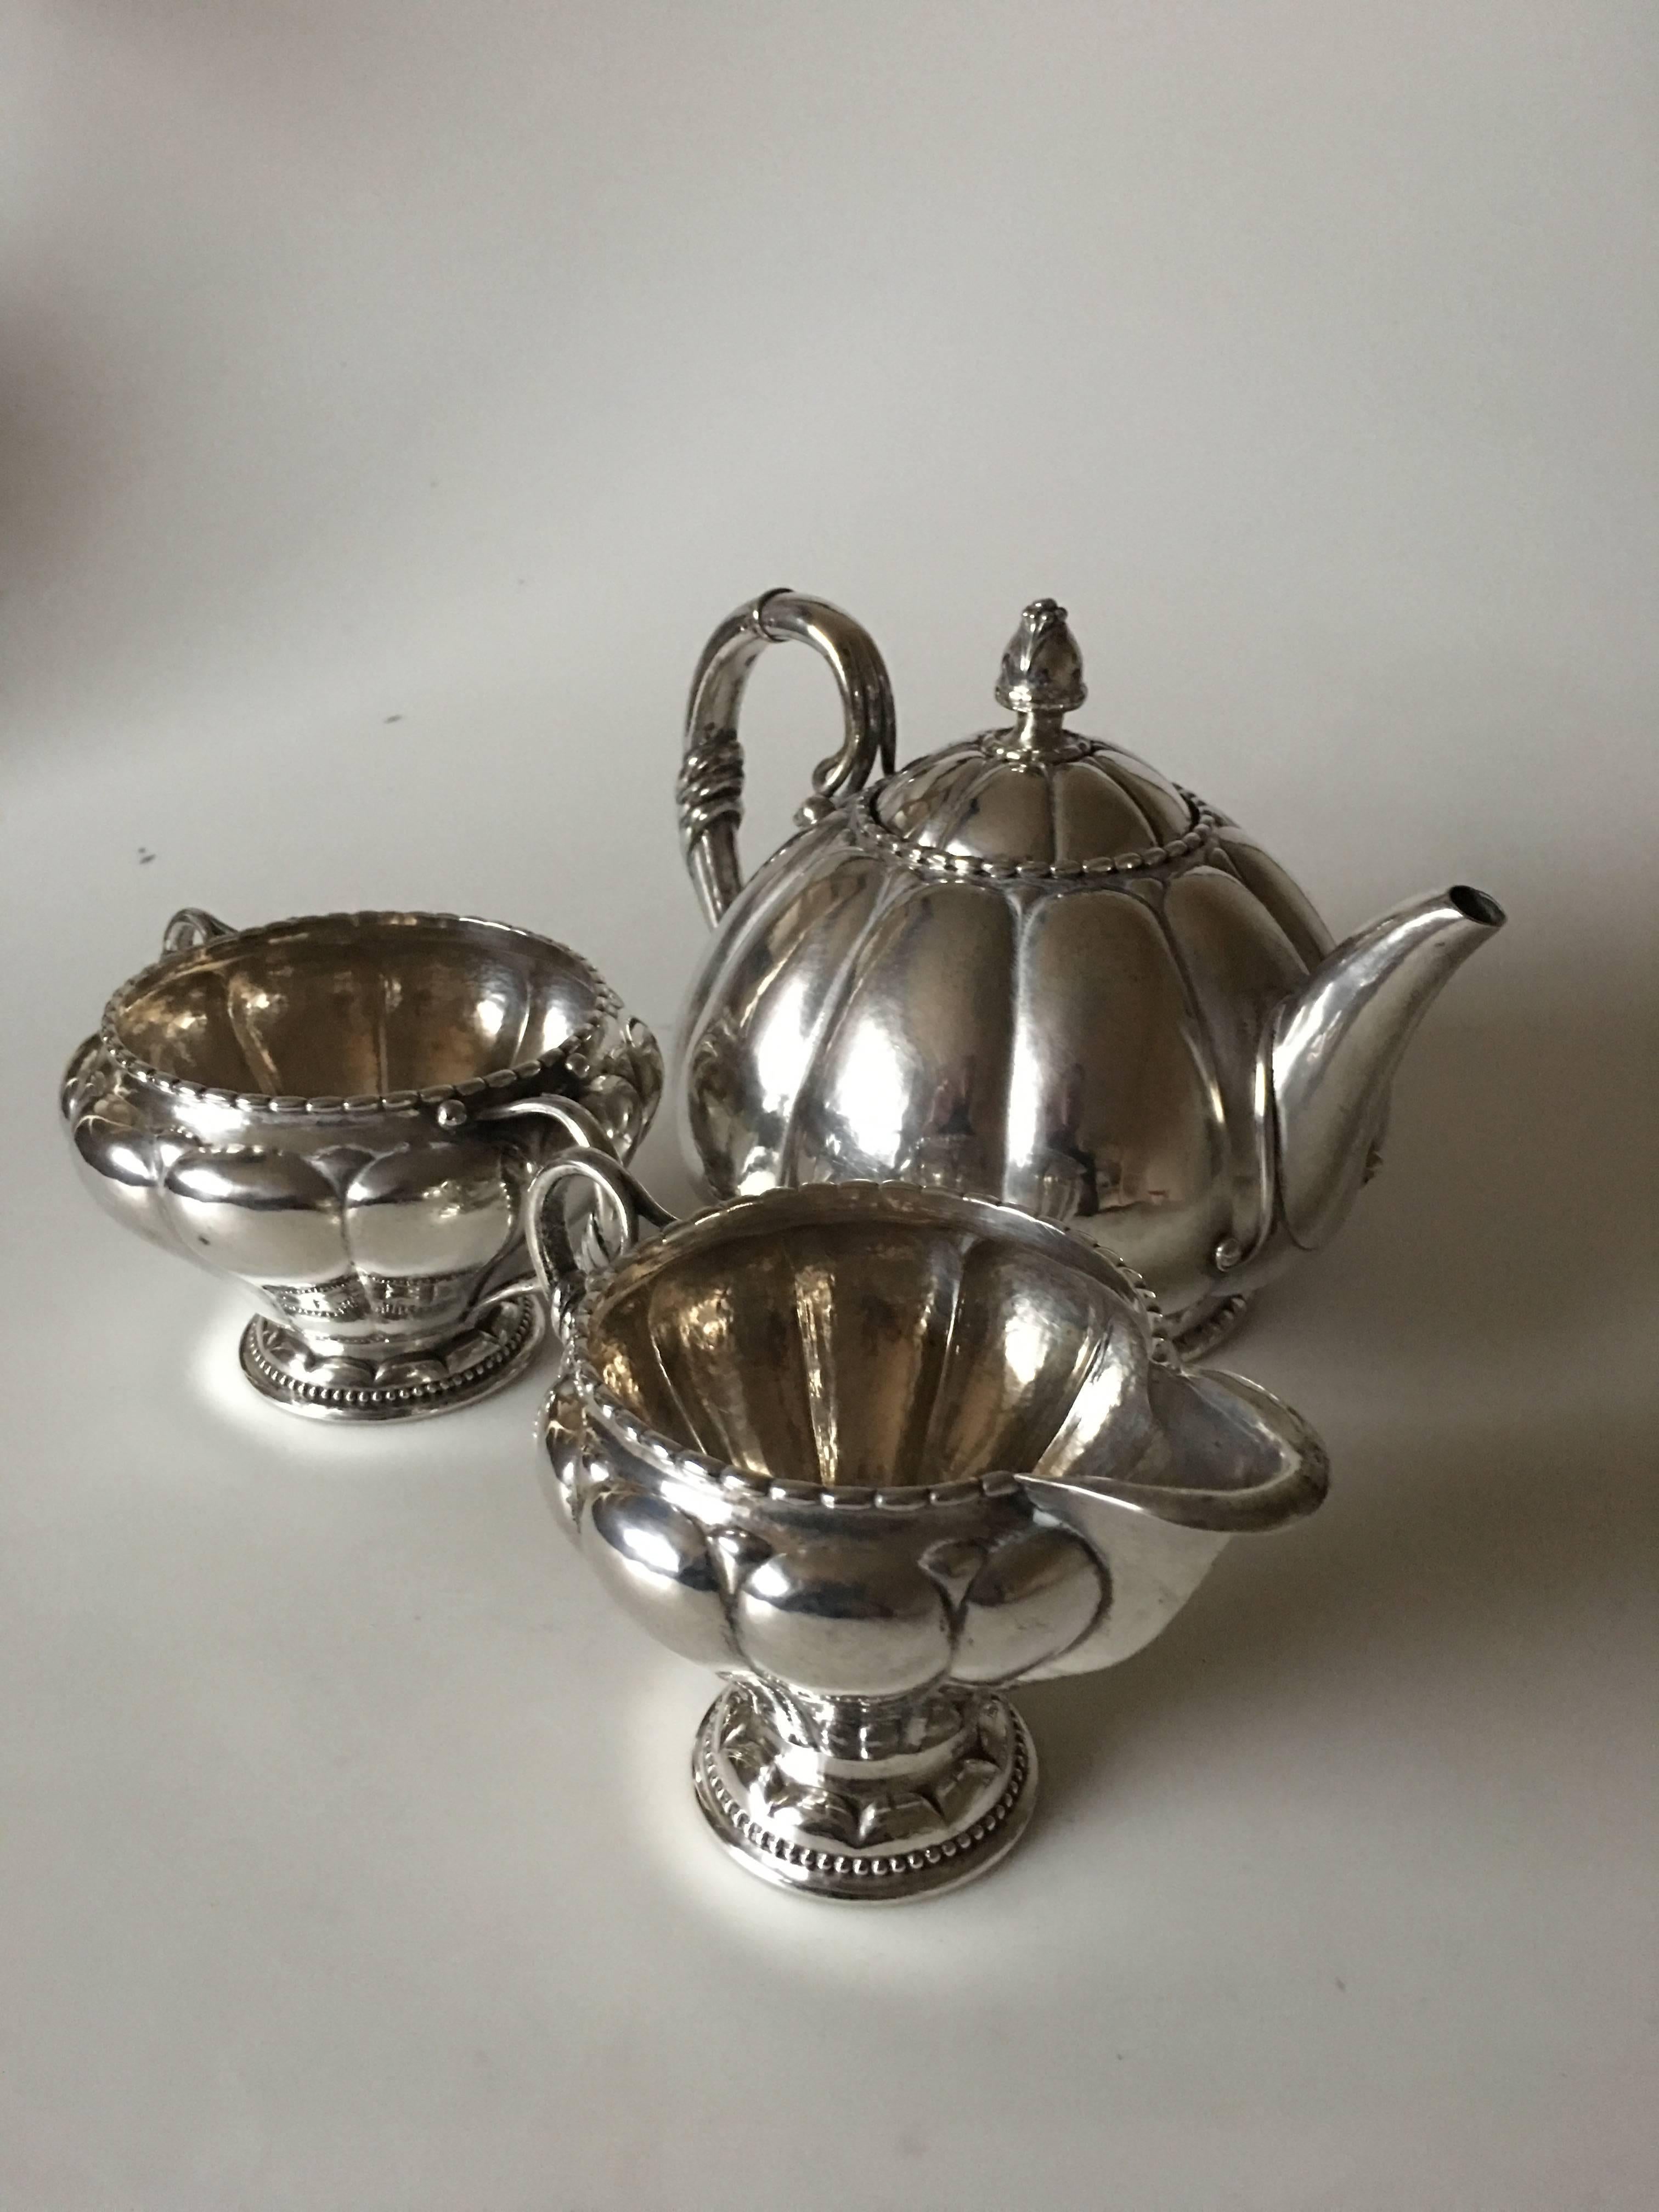 Georg Jensen tea set #26 in silver with early marks. From 1904-1908. Teapot one weighs 532 grams. 14 cm H (5 33/64